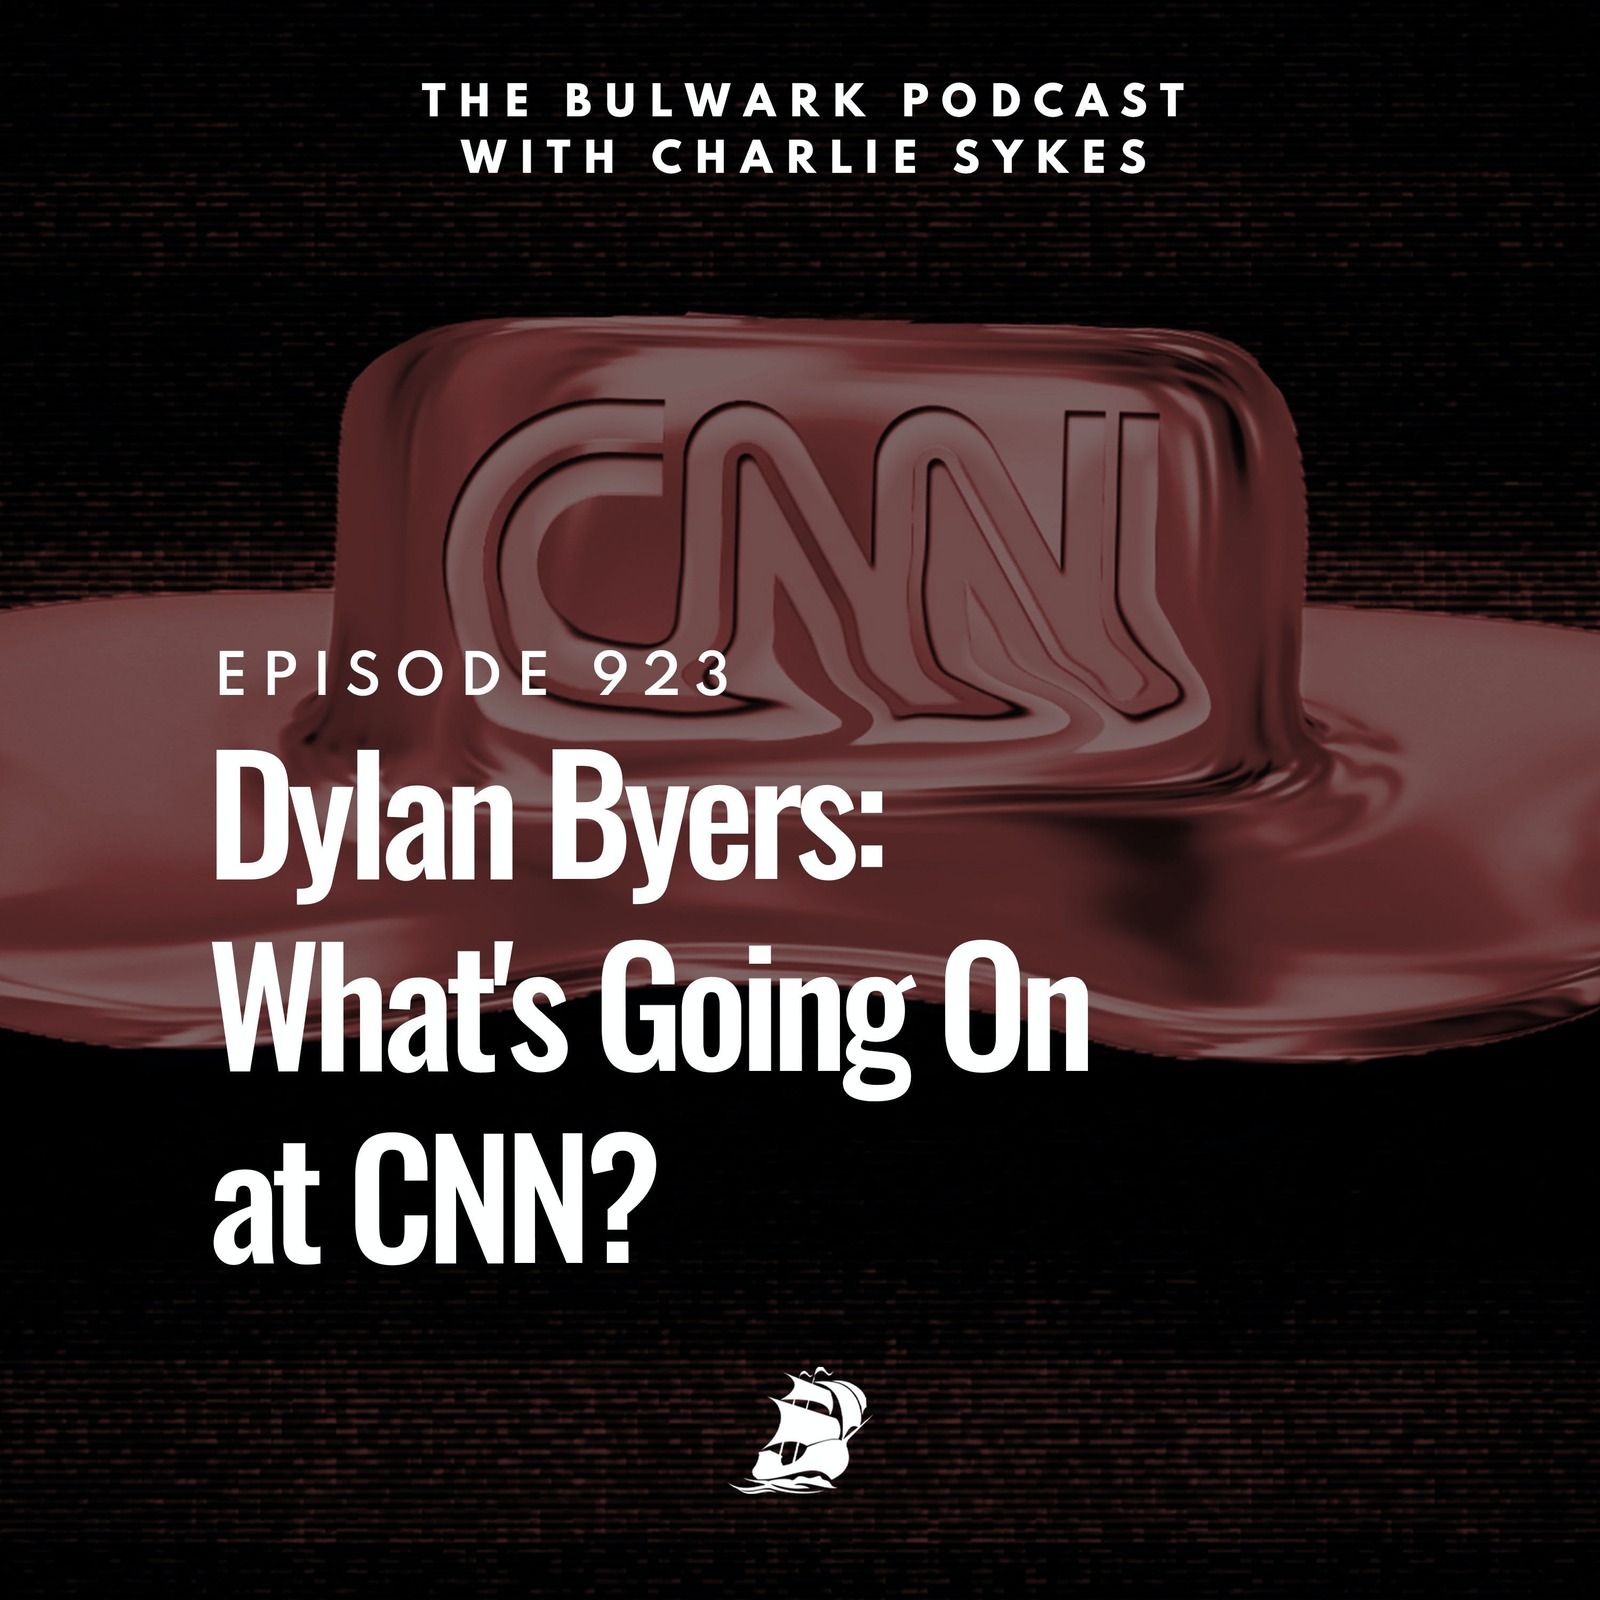 Dylan Byers: What's Going On at CNN?